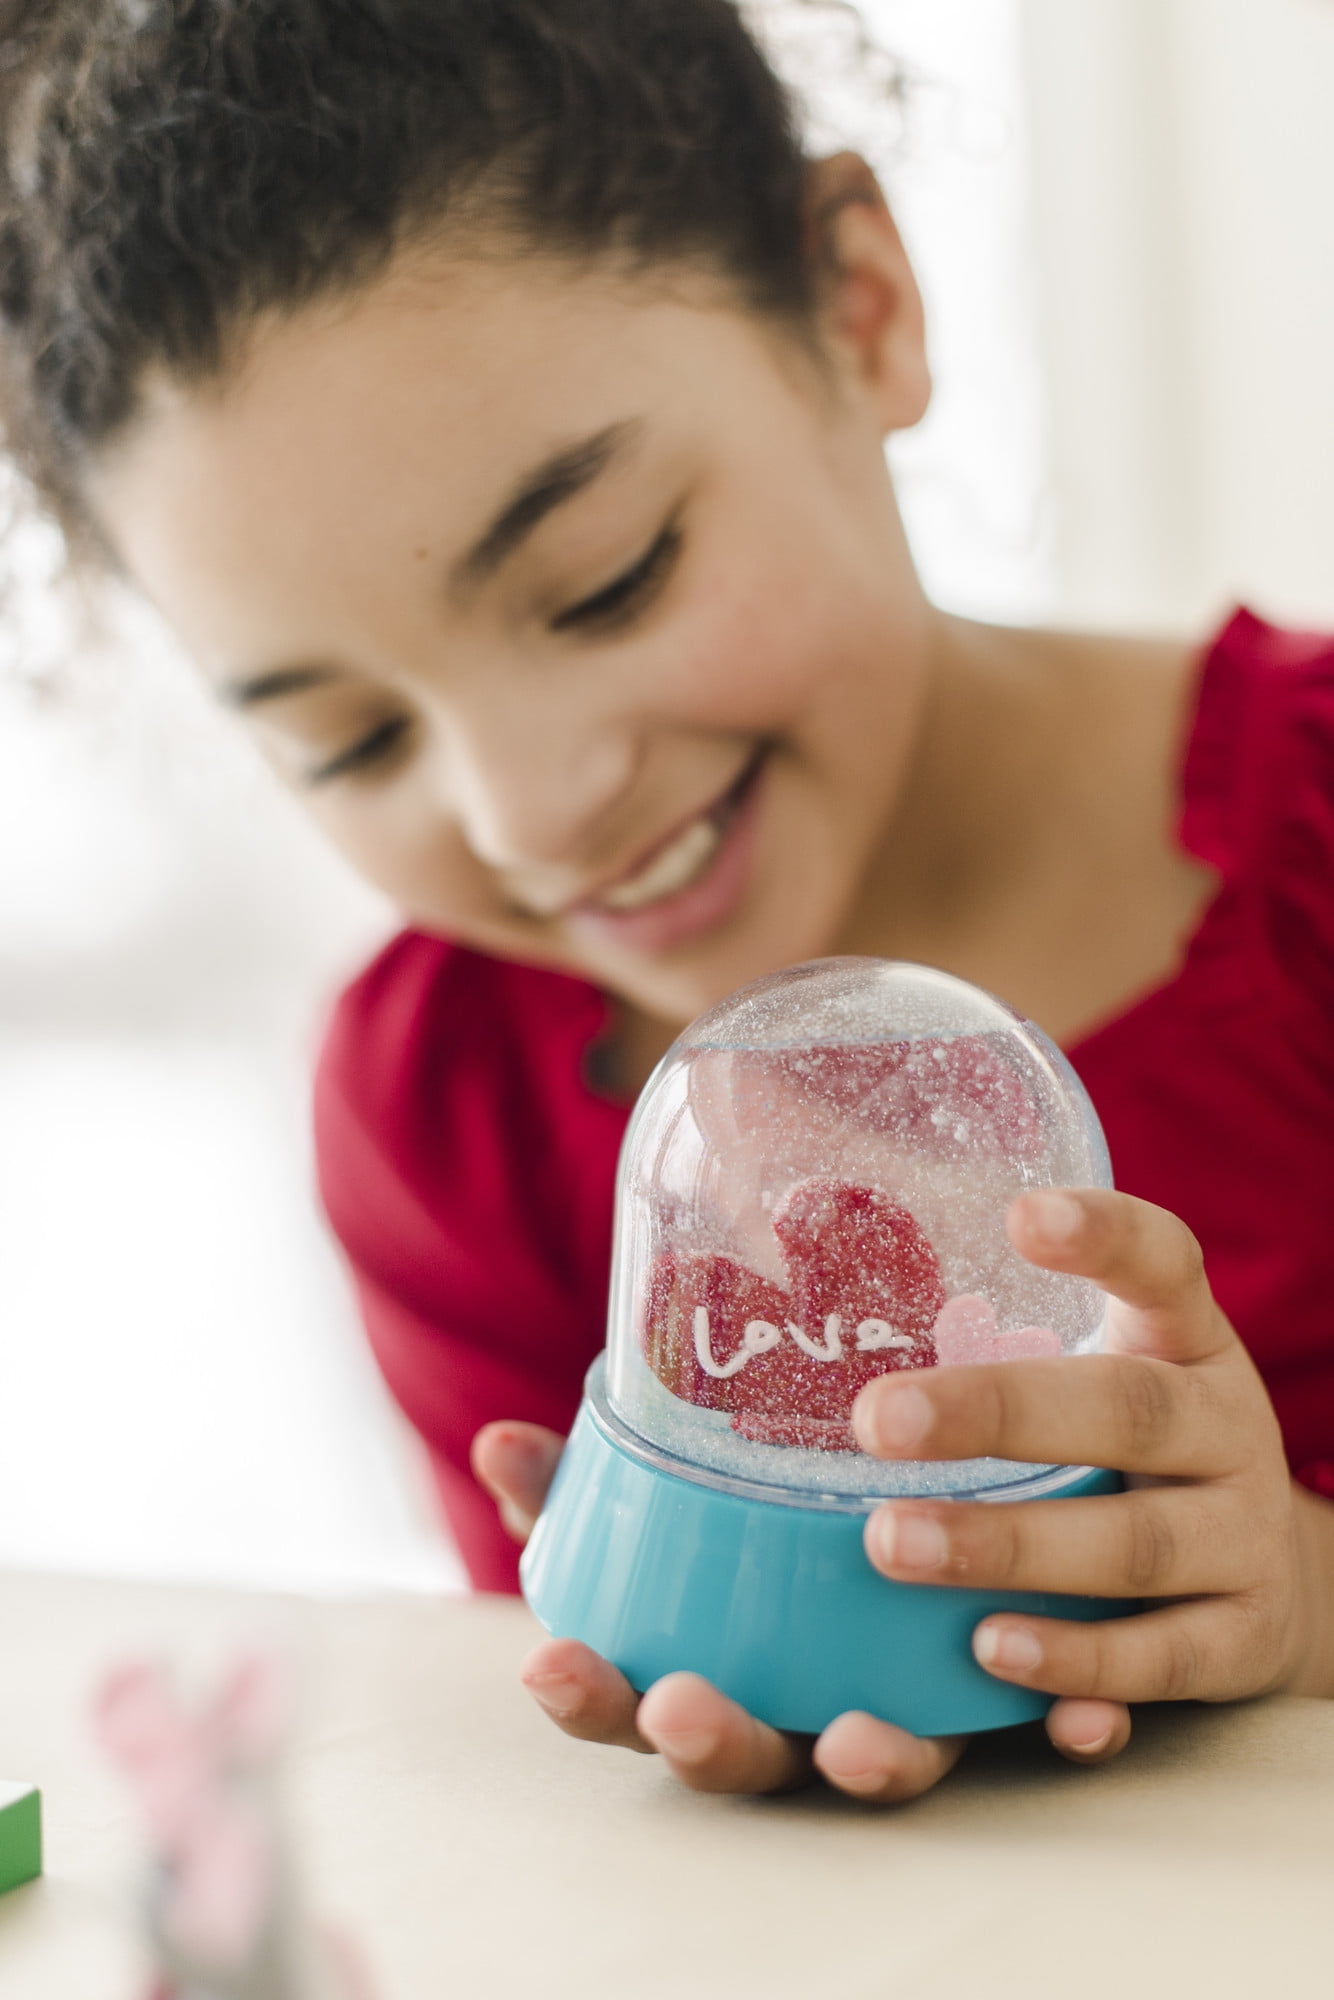 MindWare : Customer Reviews : Make Your Own Glitter Snow Globes